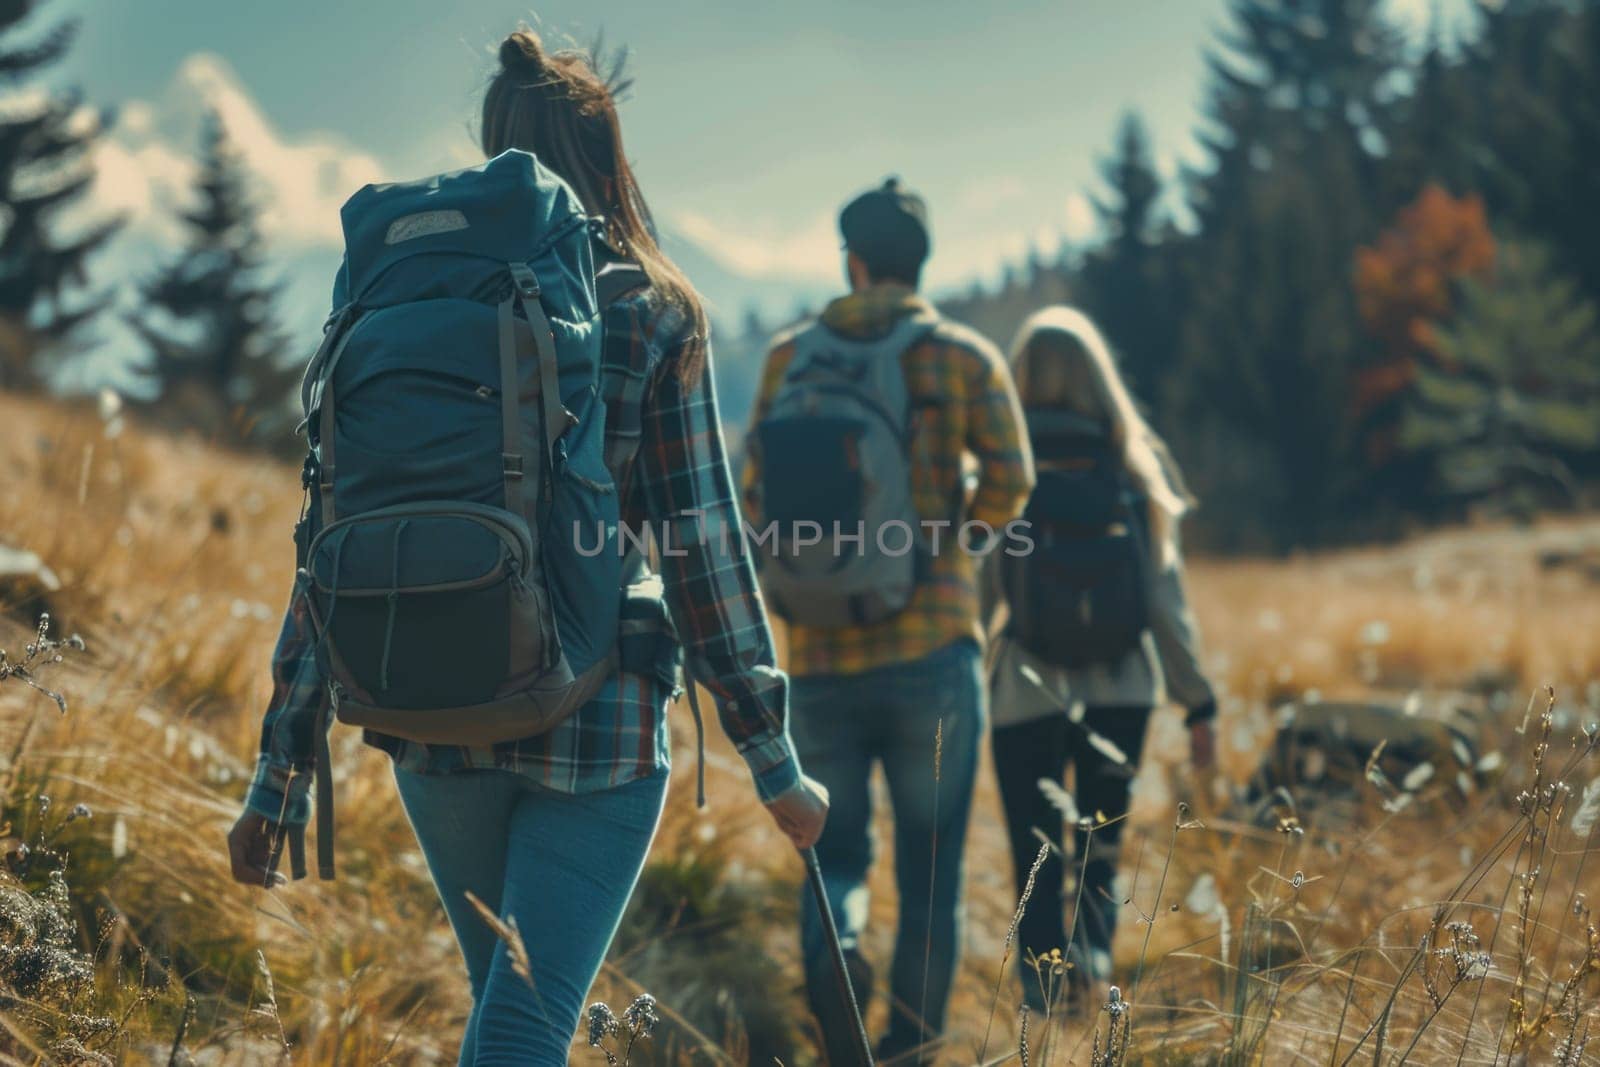 A group of people are walking through a field with backpacks and one of them is holding a baseball bat